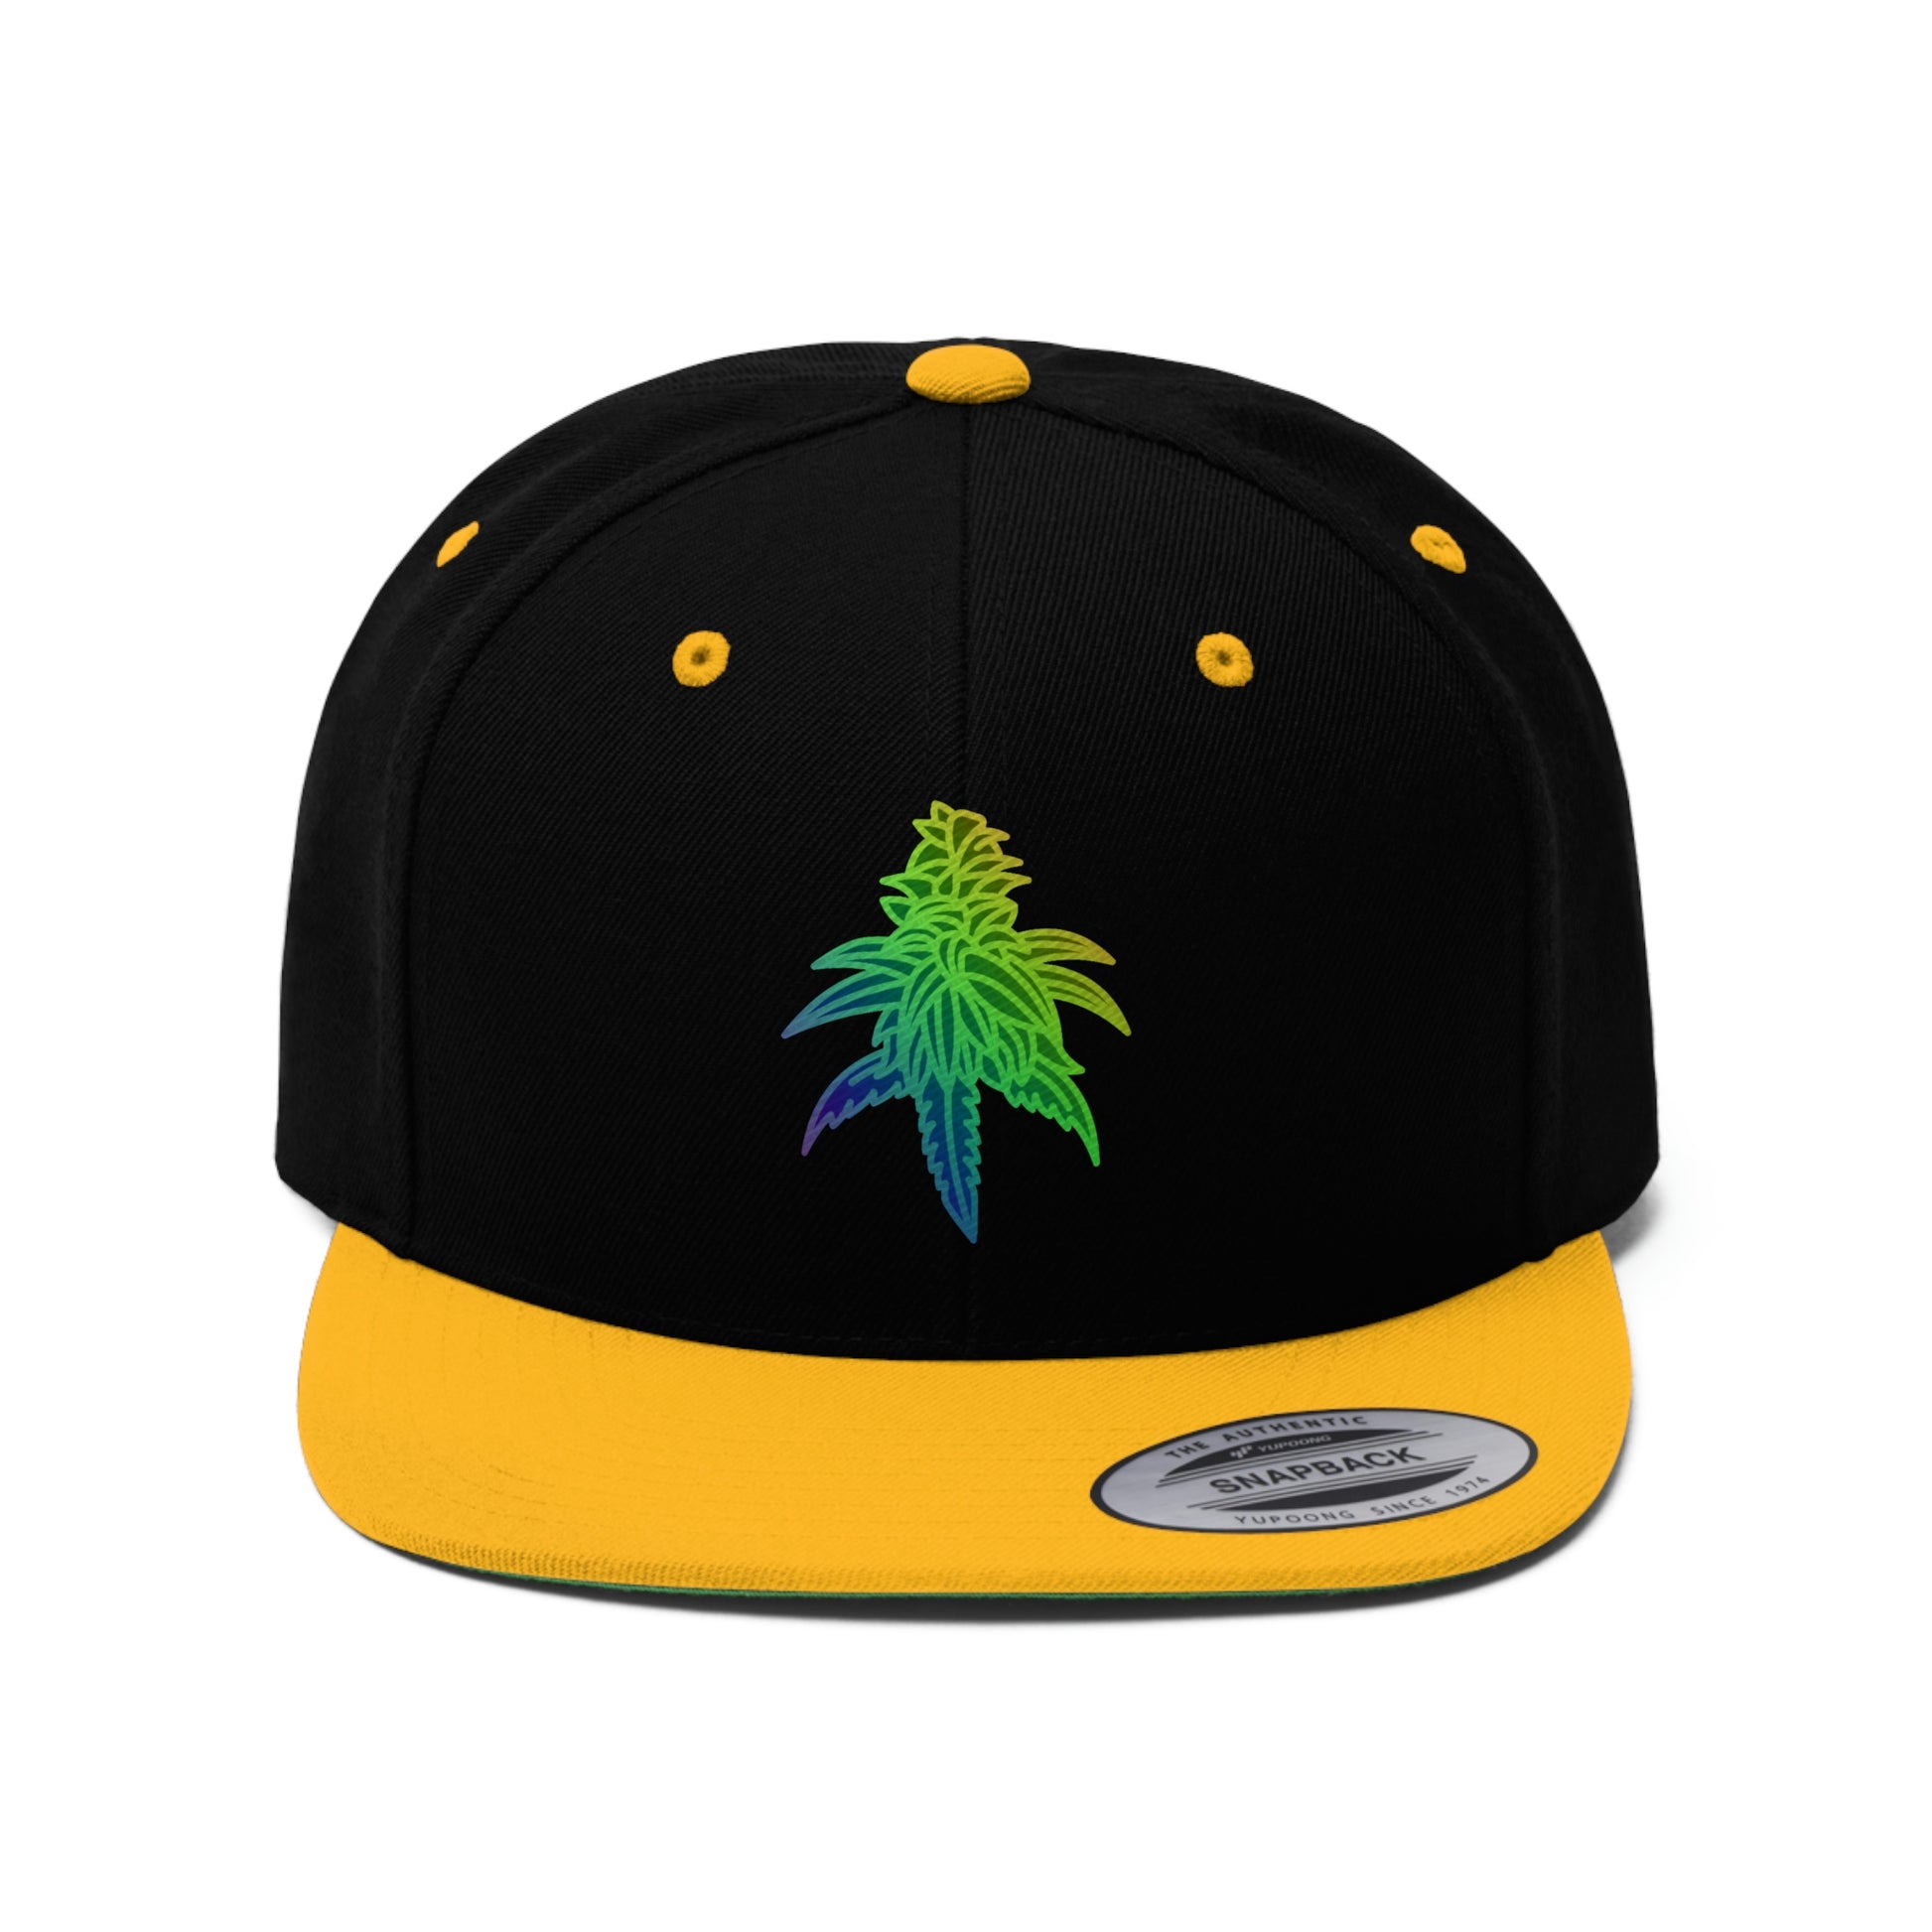 A bright close up photo of the Rainbow Sherbet Marijuana Snapback Hat in gold and black